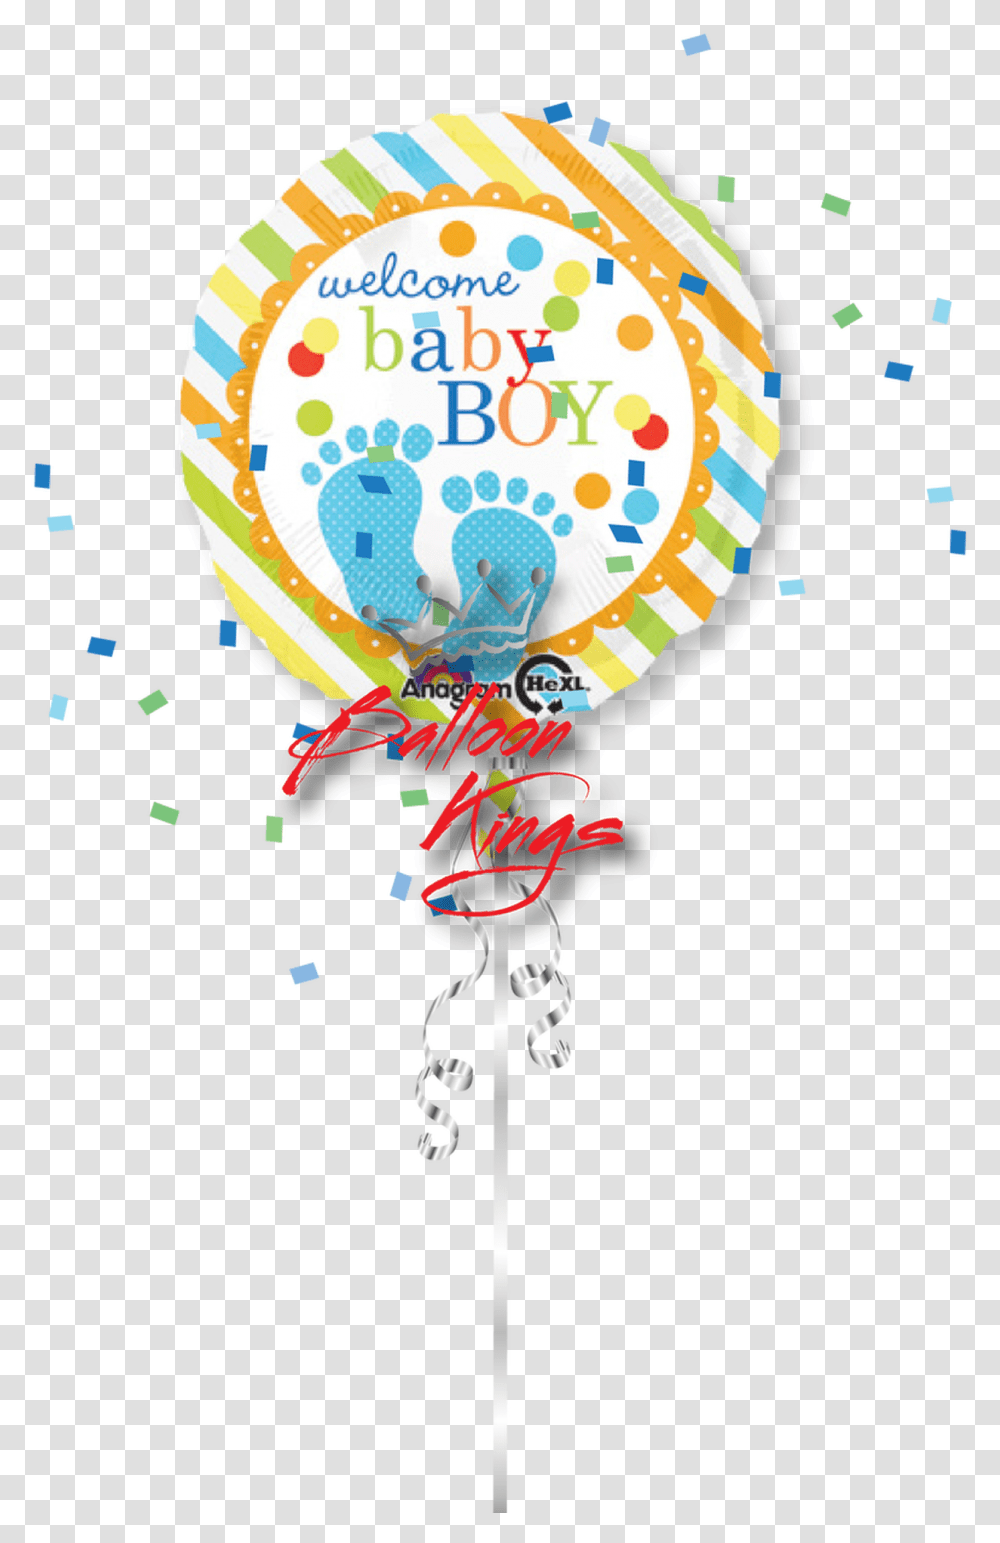 Welcome Baby Boy Feet Welcome Baby Boy, Balloon, Paper, Confetti, Poster Transparent Png